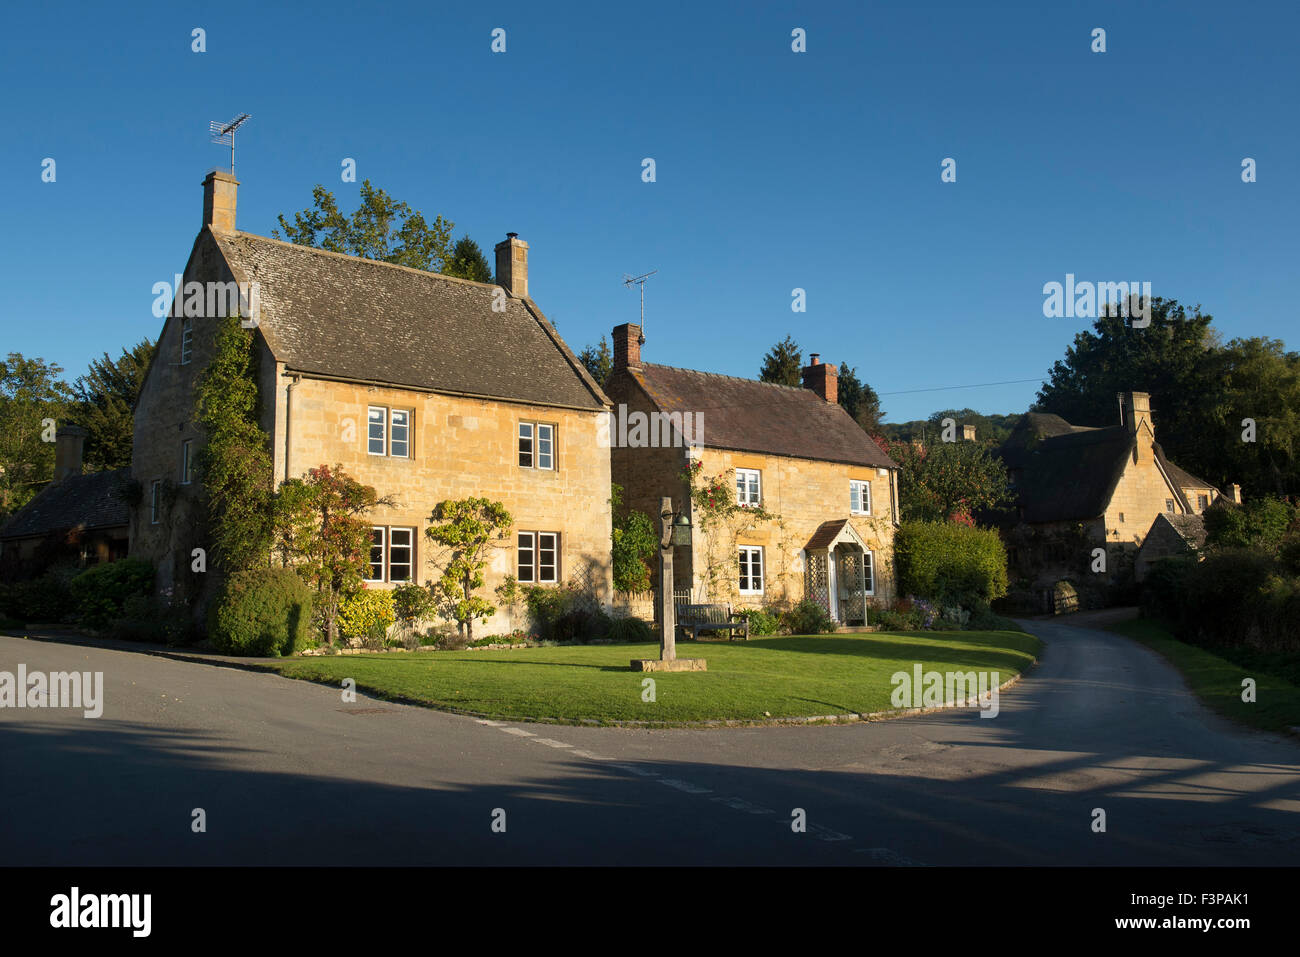 Cotswold cottages in Stanton village, Cotswolds, Gloucestershire, England Stock Photo